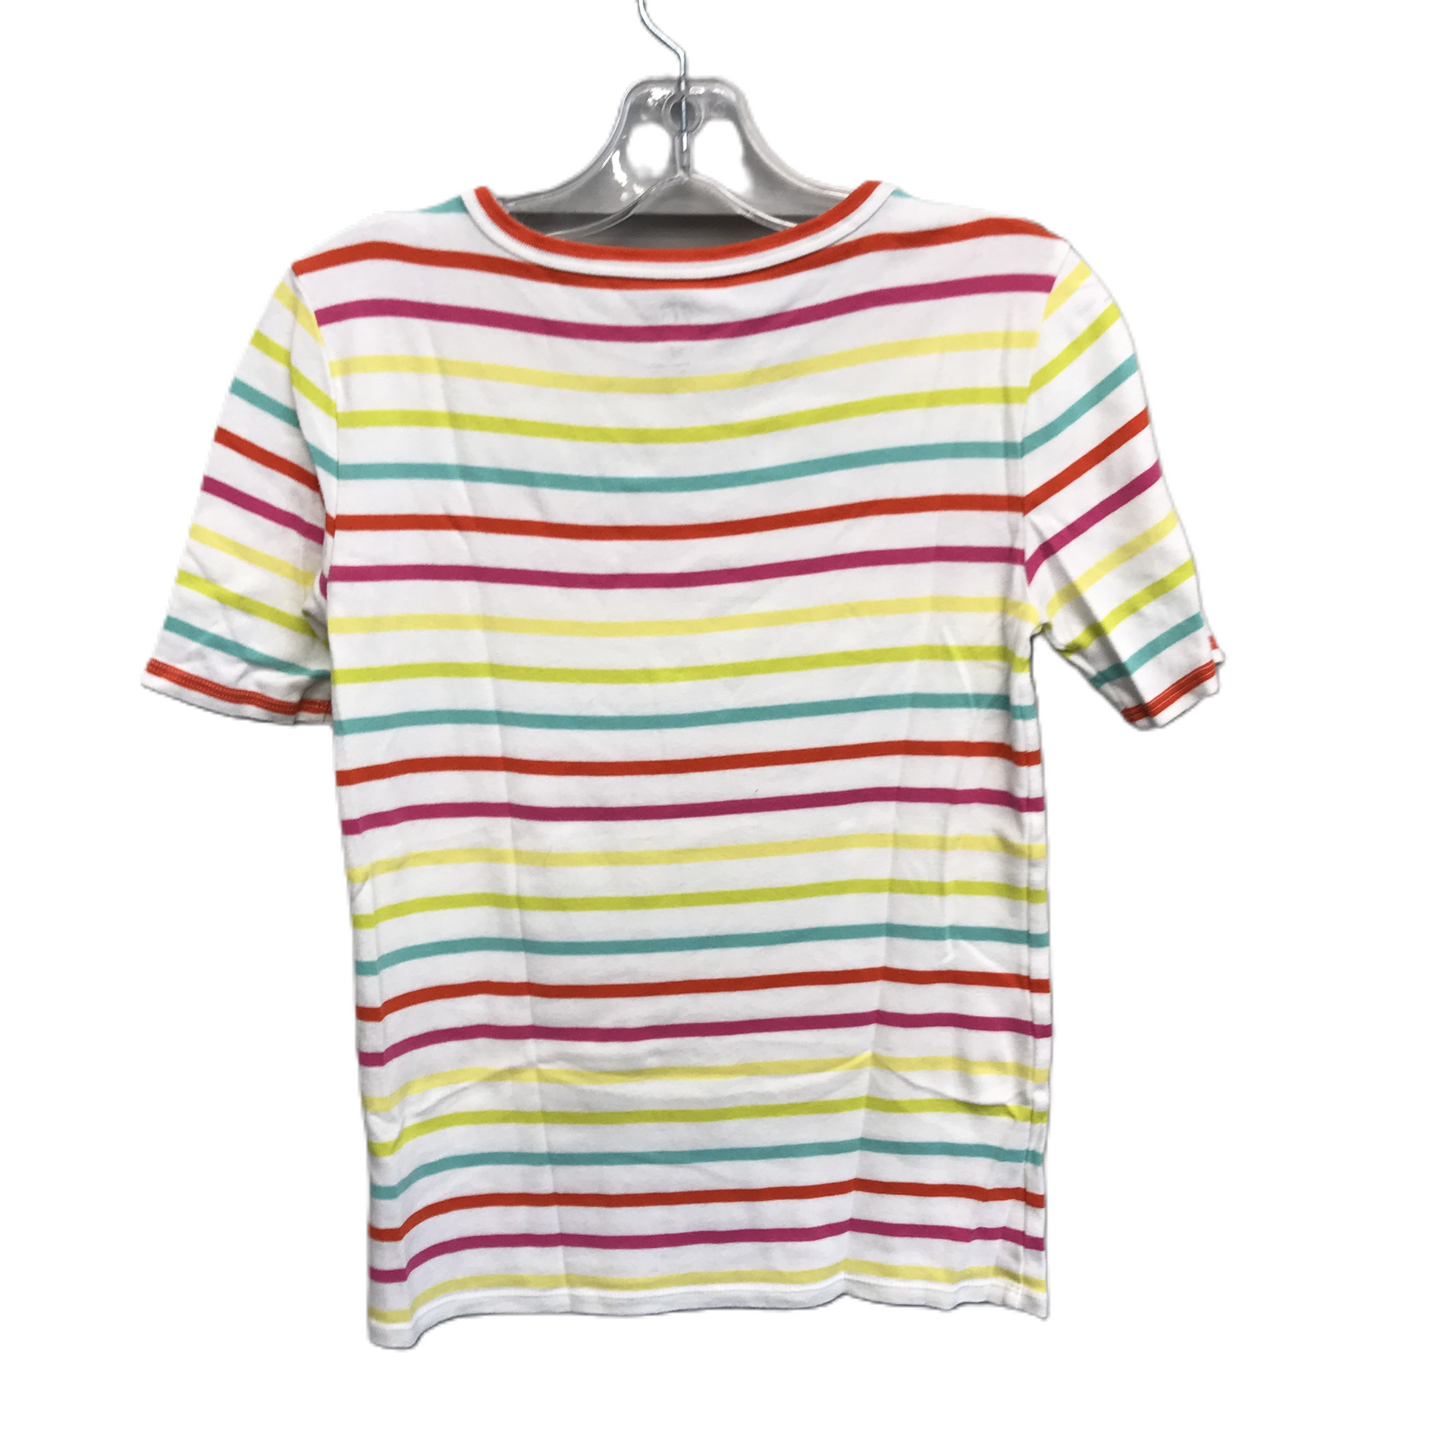 Multi-colored Top Short Sleeve Basic By J. Crew, Size: S